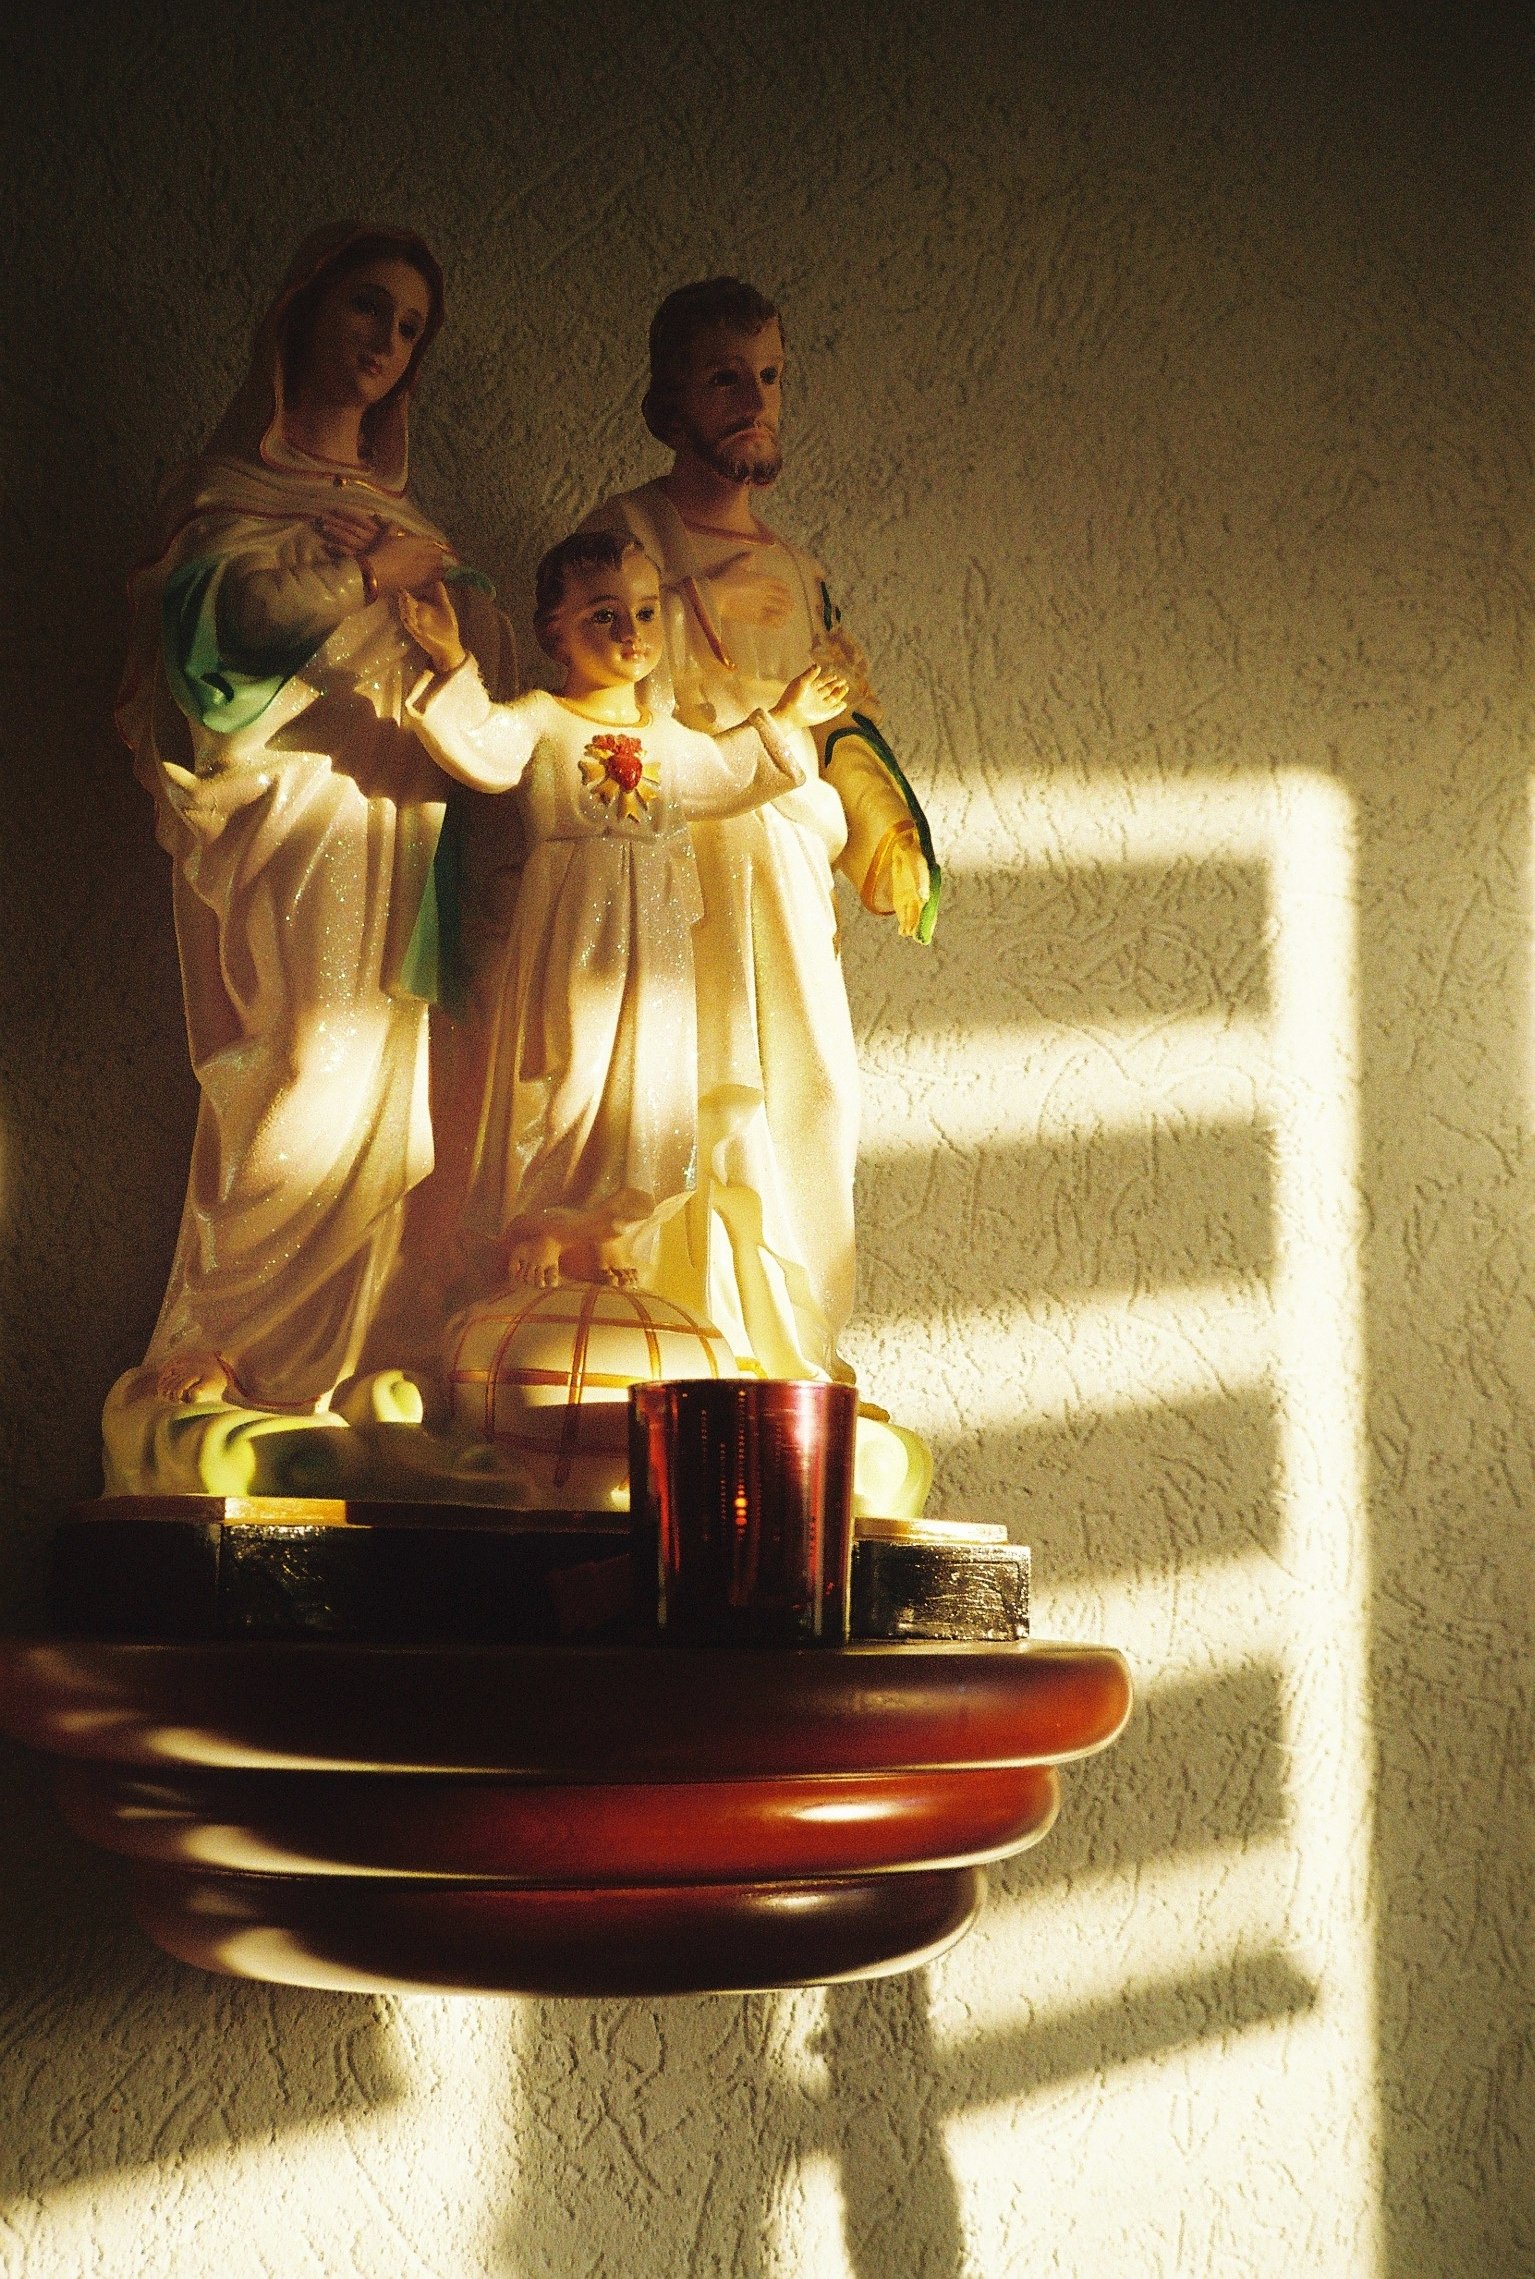 Closeup of a statue of the holy Mary, Joseph and Jesus as a child.